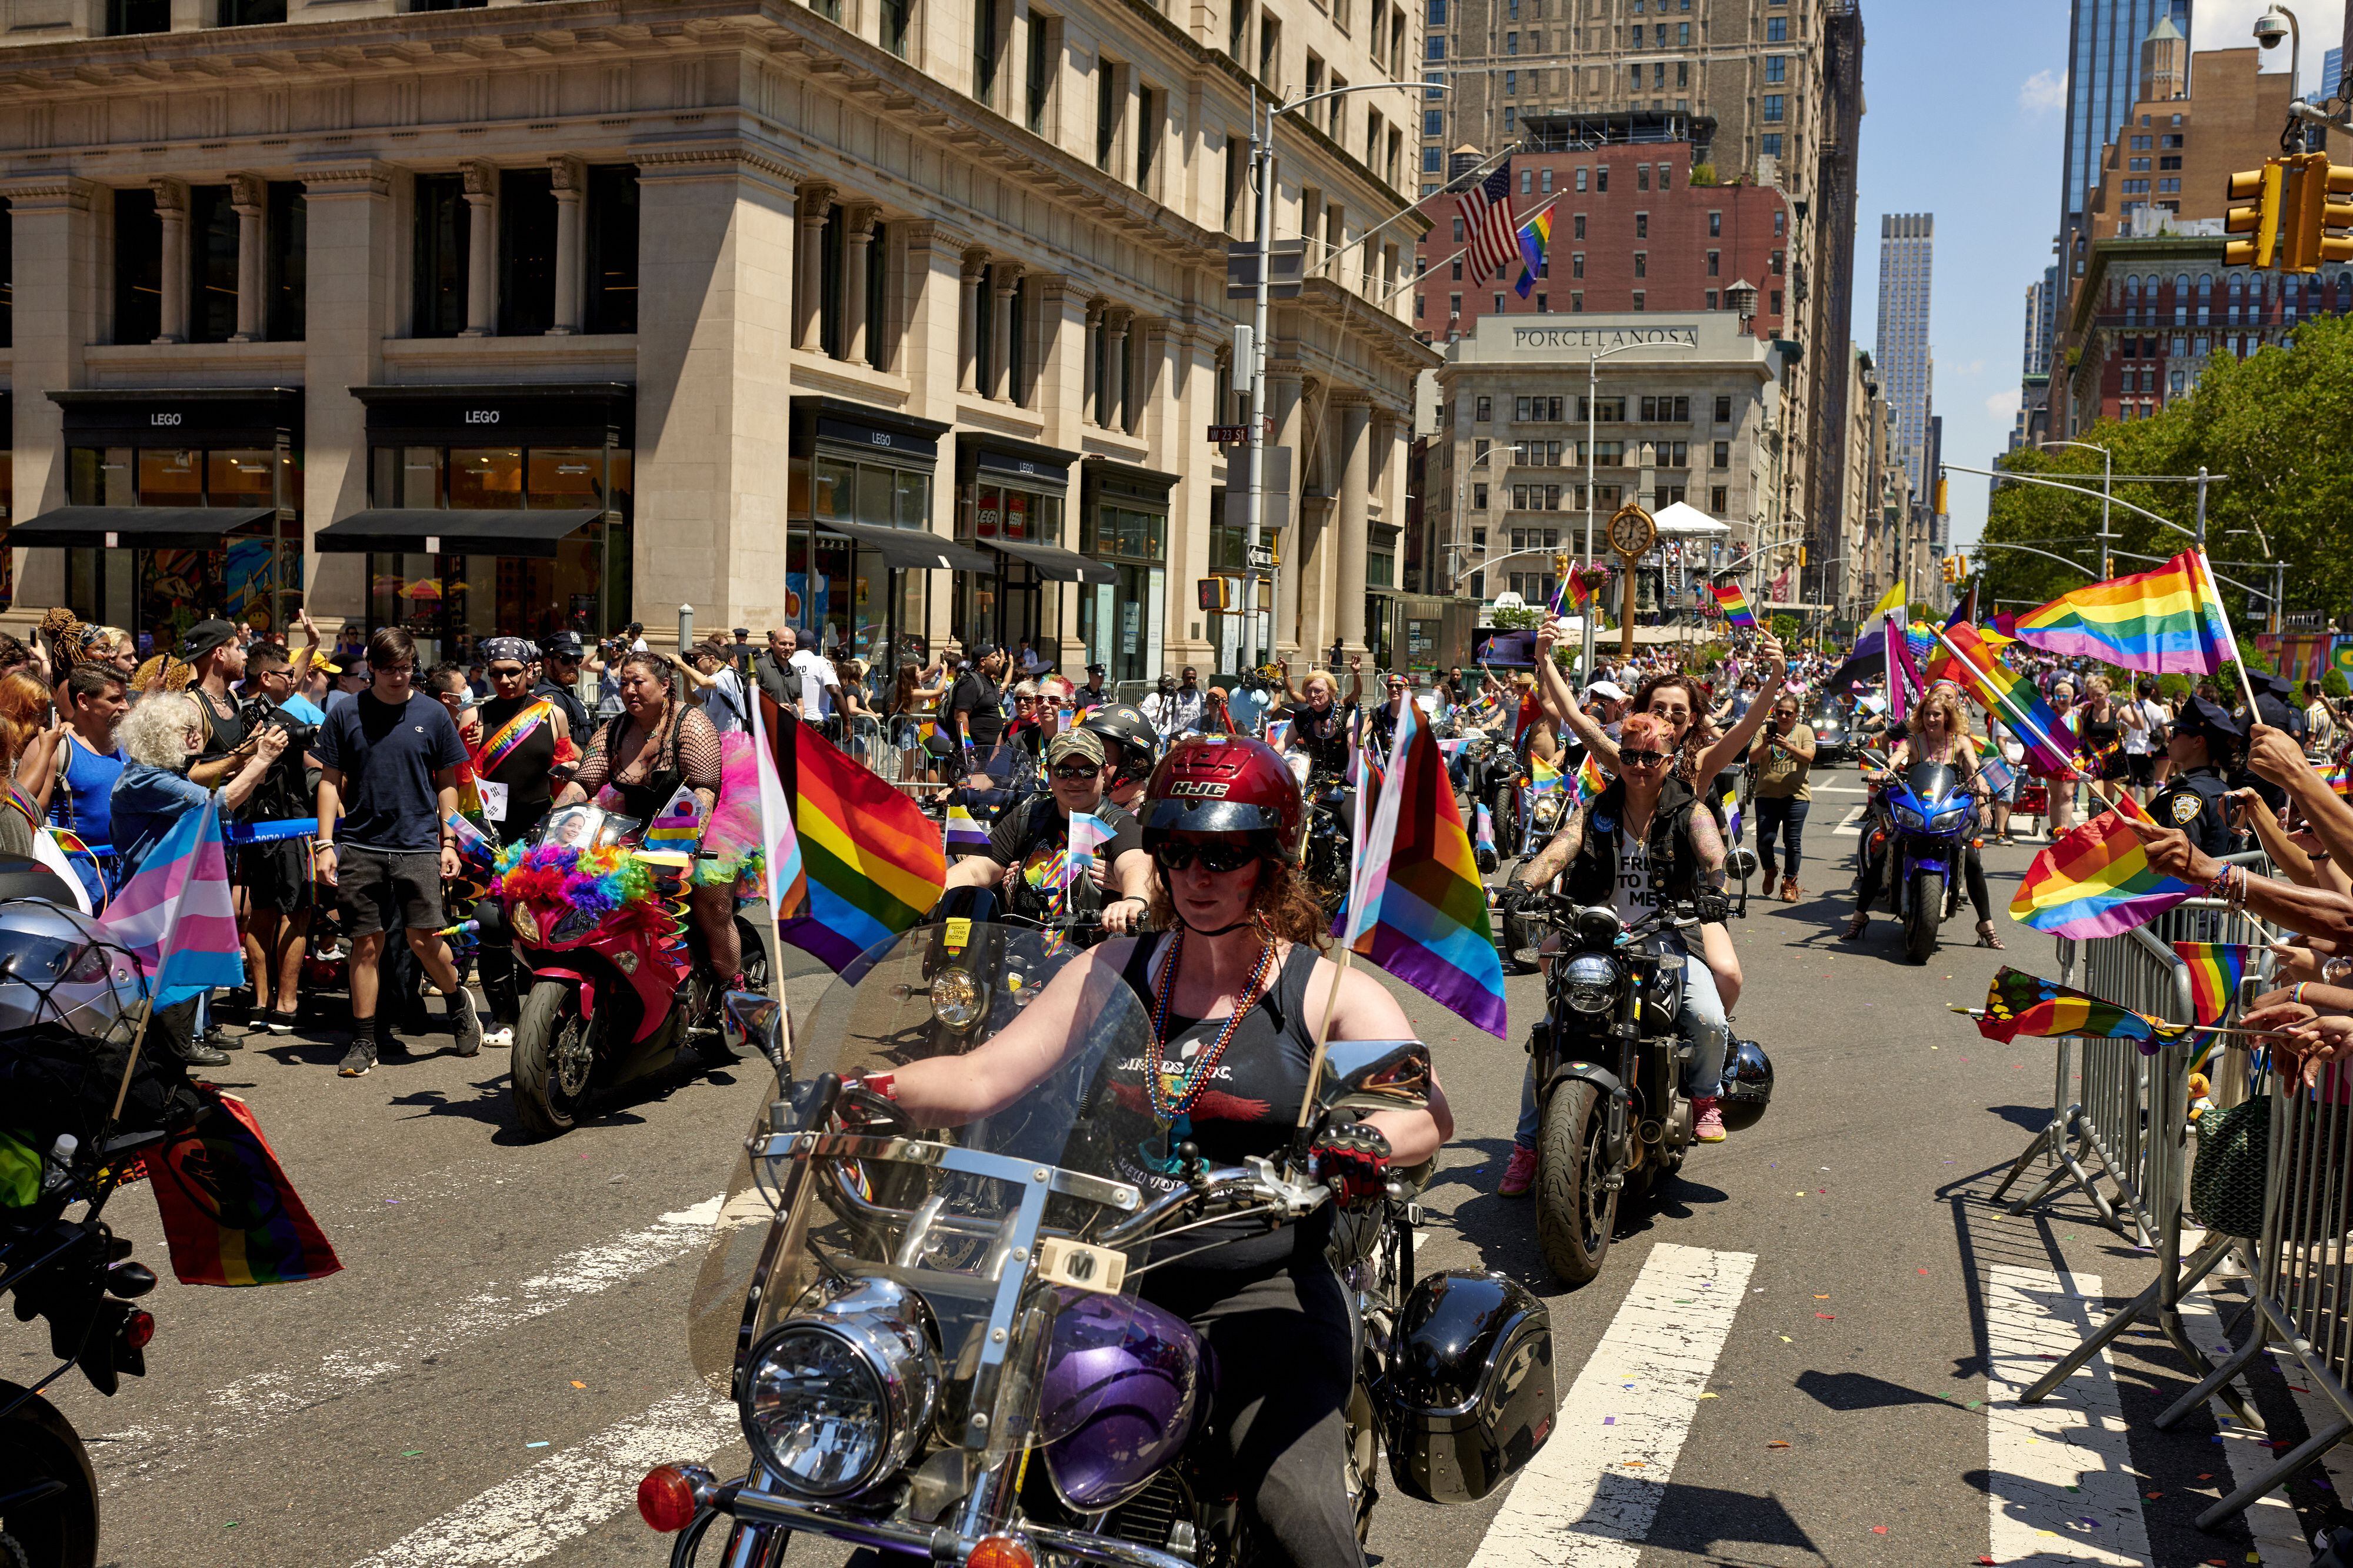 Attendees ride motorcycles during the New York City Pride March in New York, USA.